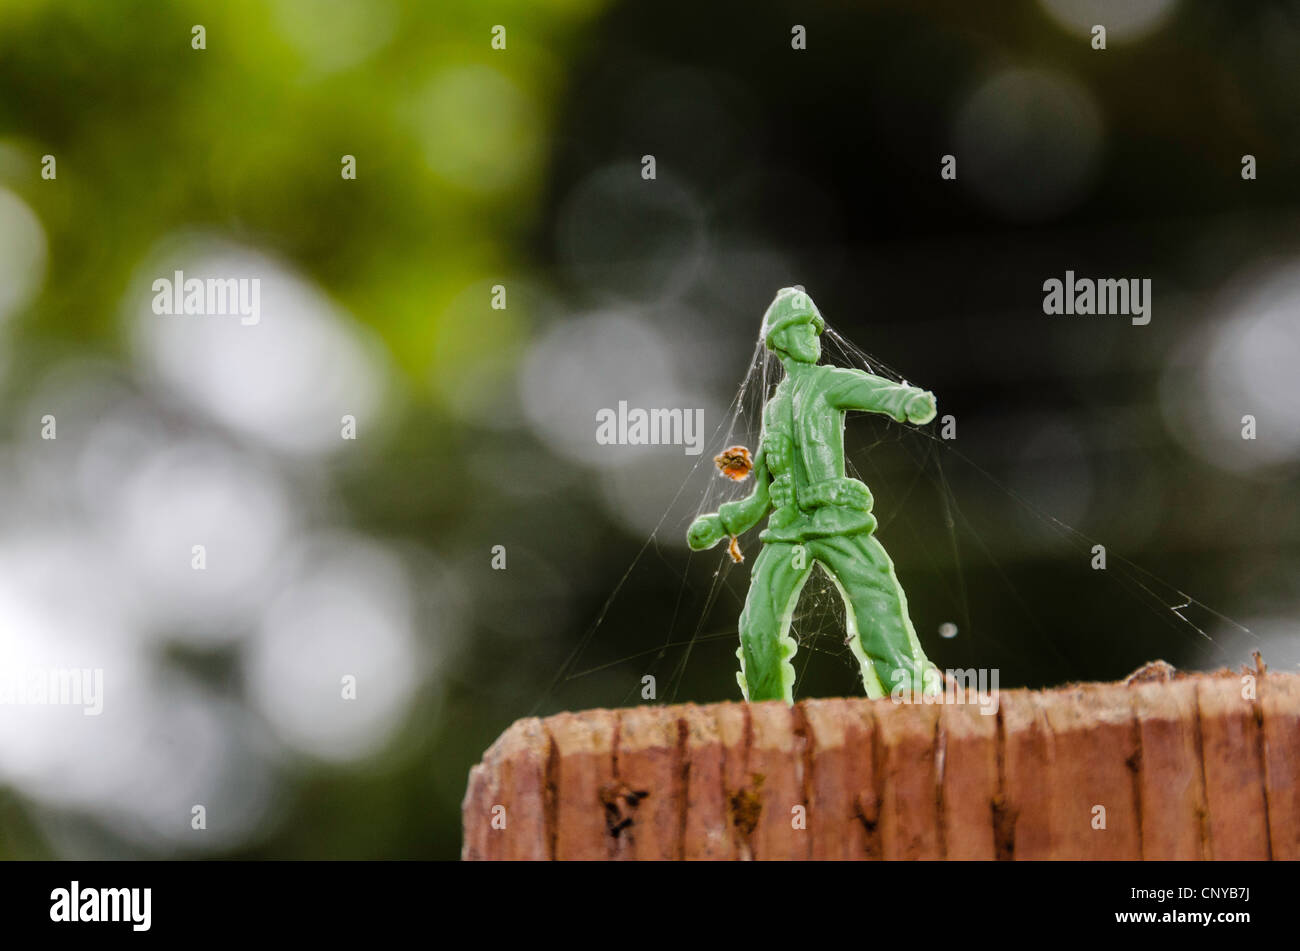 Green Army Man covered in spider webs. Stock Photo